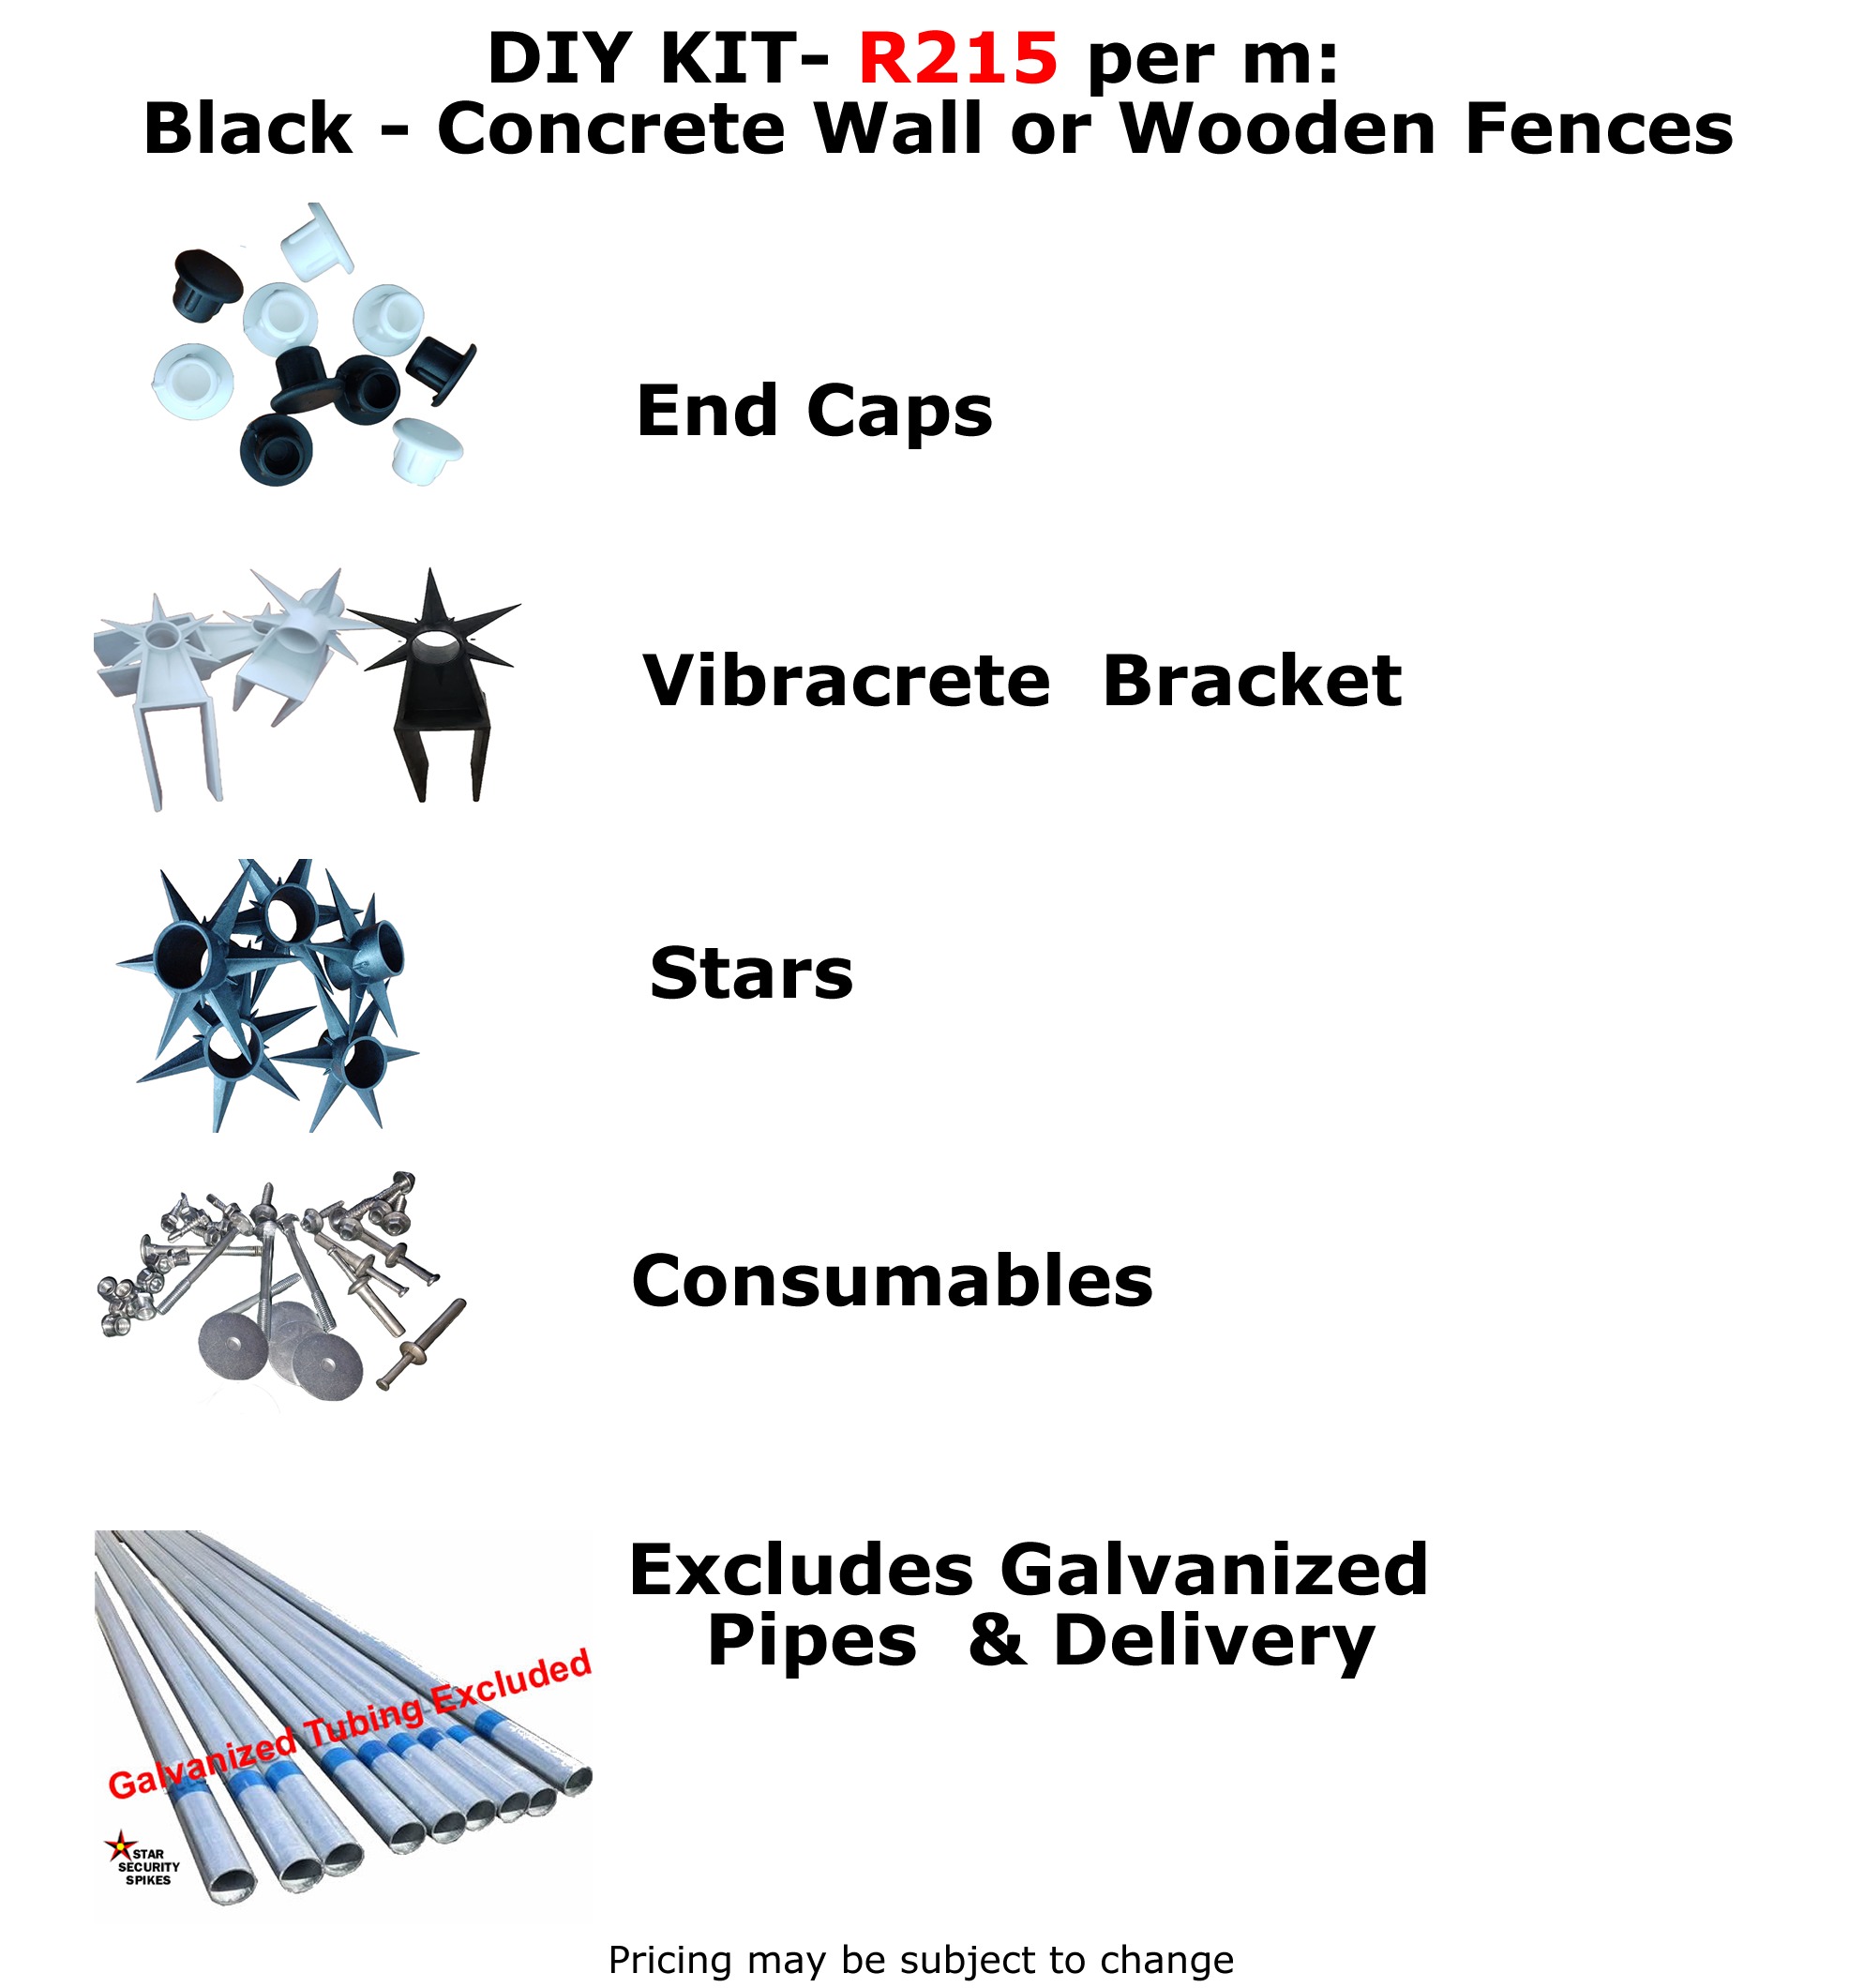 Security Spikes DIY Kits for concrete walls in Black